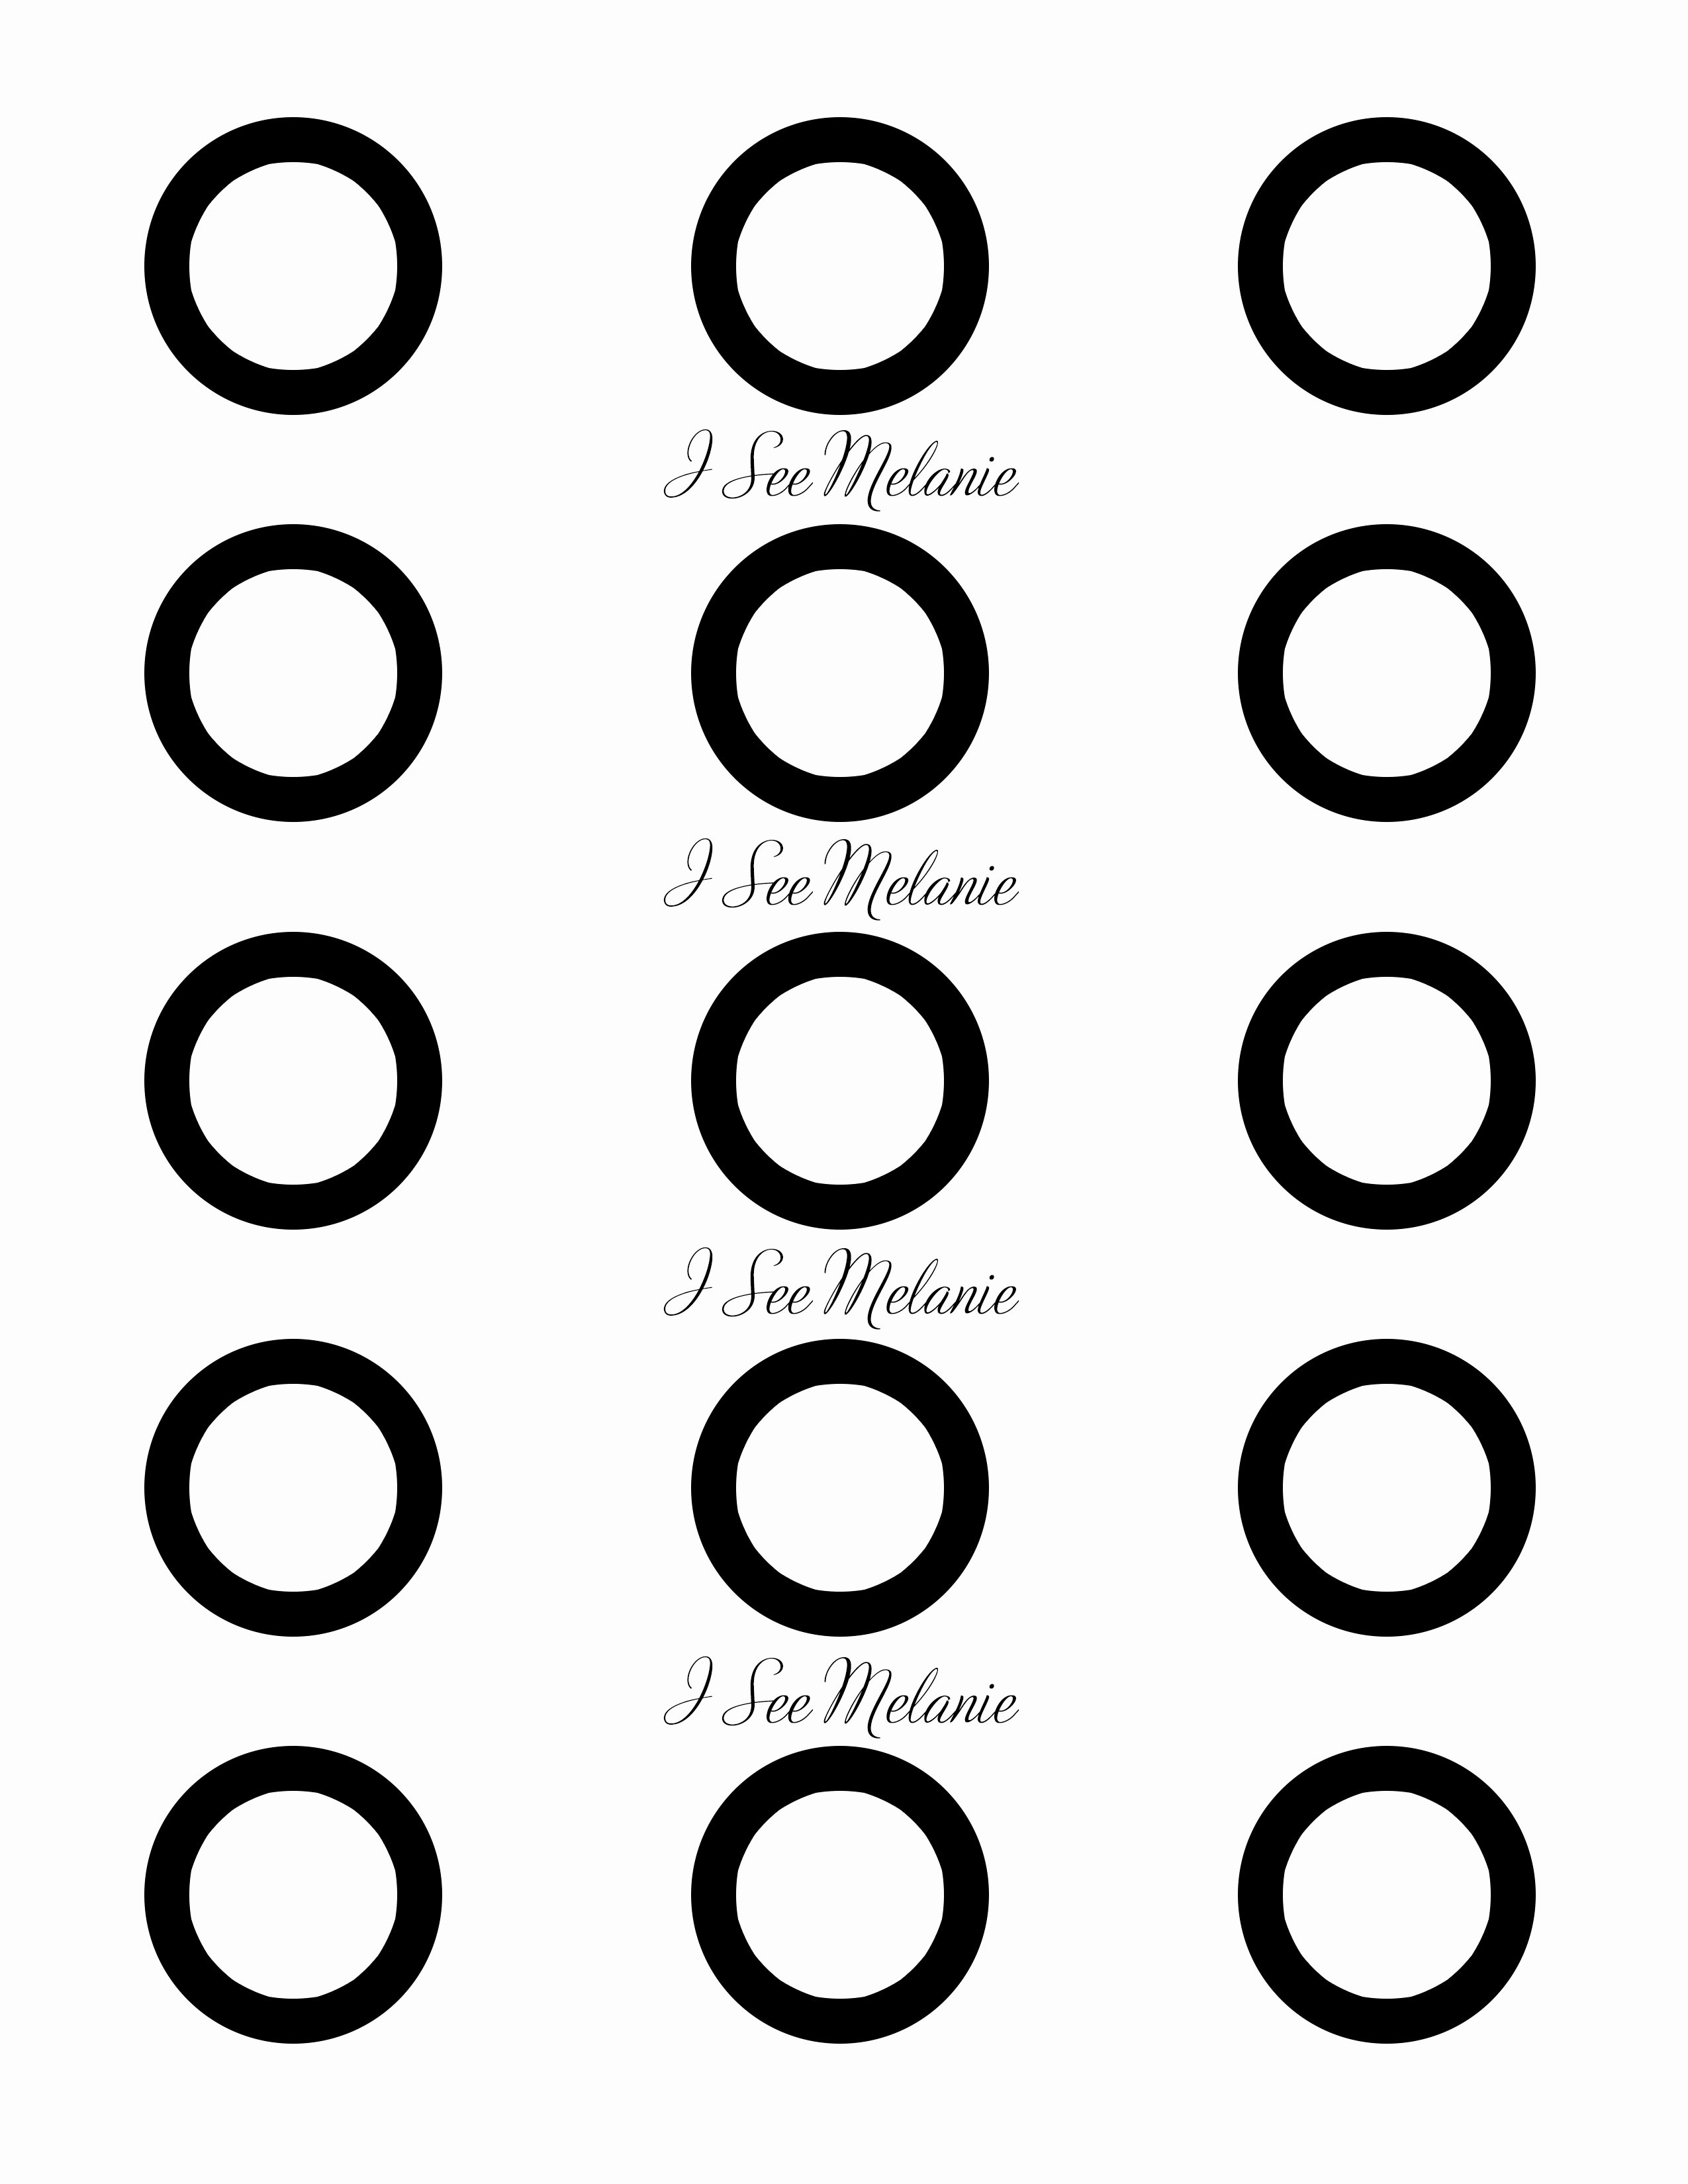 Macaron Template Printable Luxury I See Melanie Macaron Template – 1 5 Inches Wide – Right